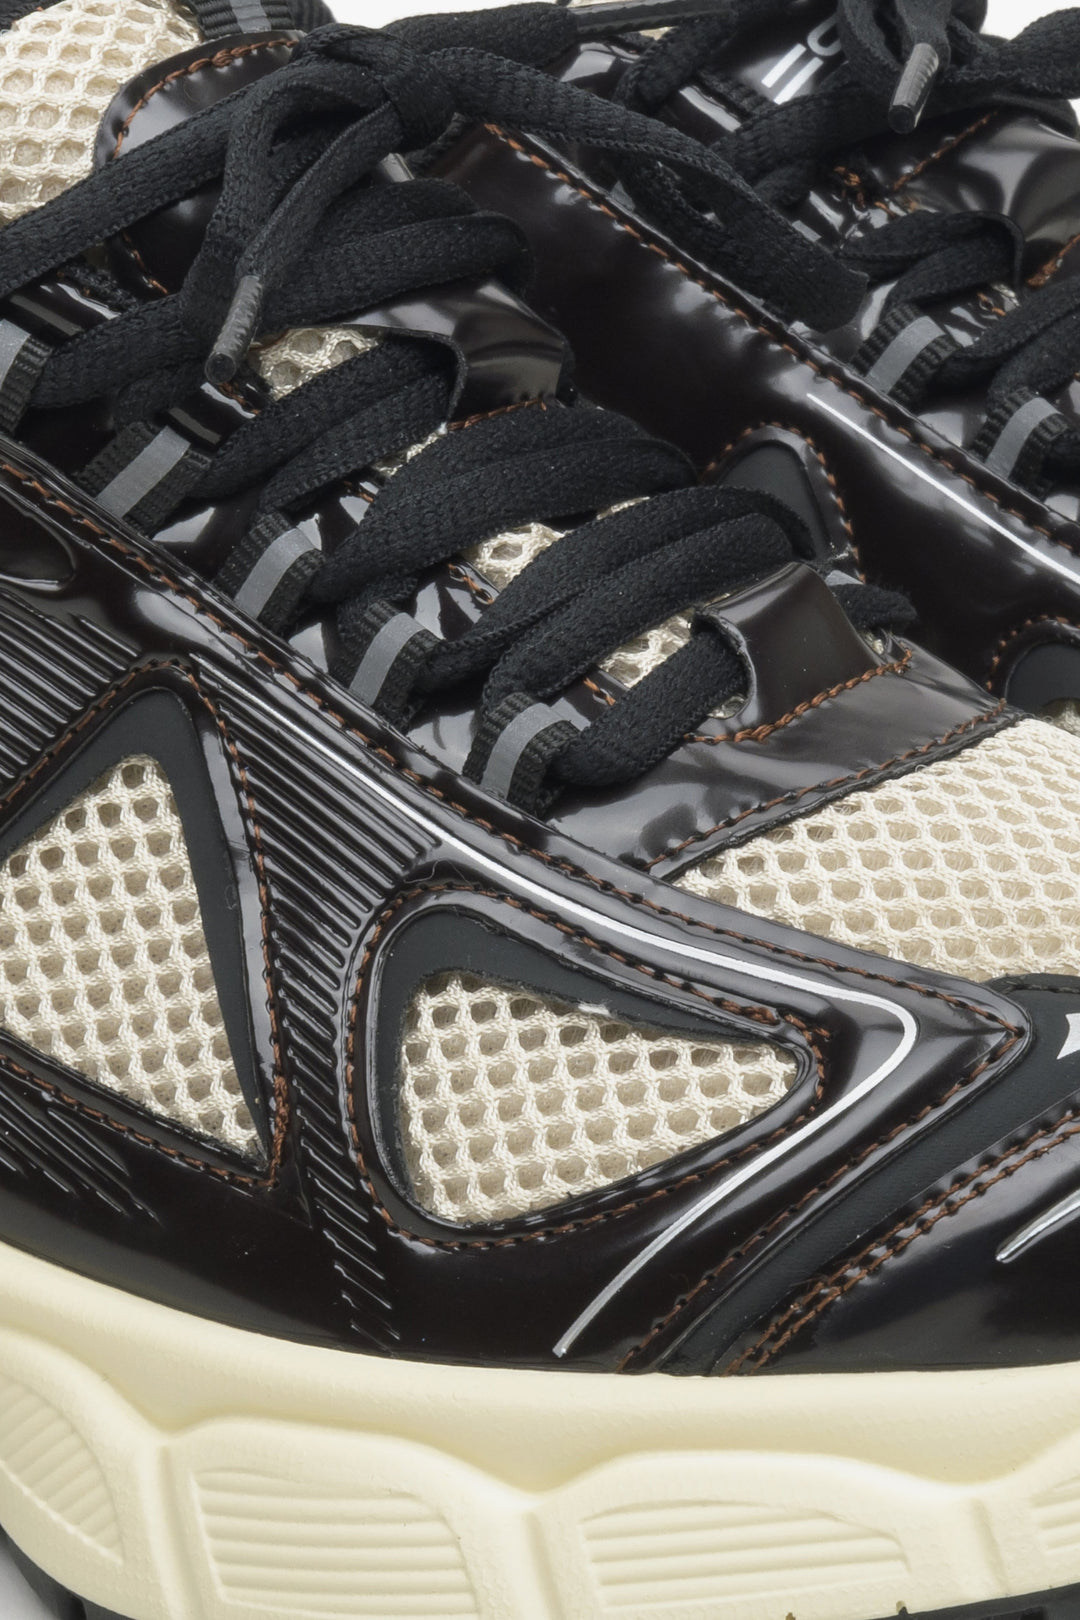 Women's black and beige sneakers with a flexible platform - close-up on the lacing line of the shoe.